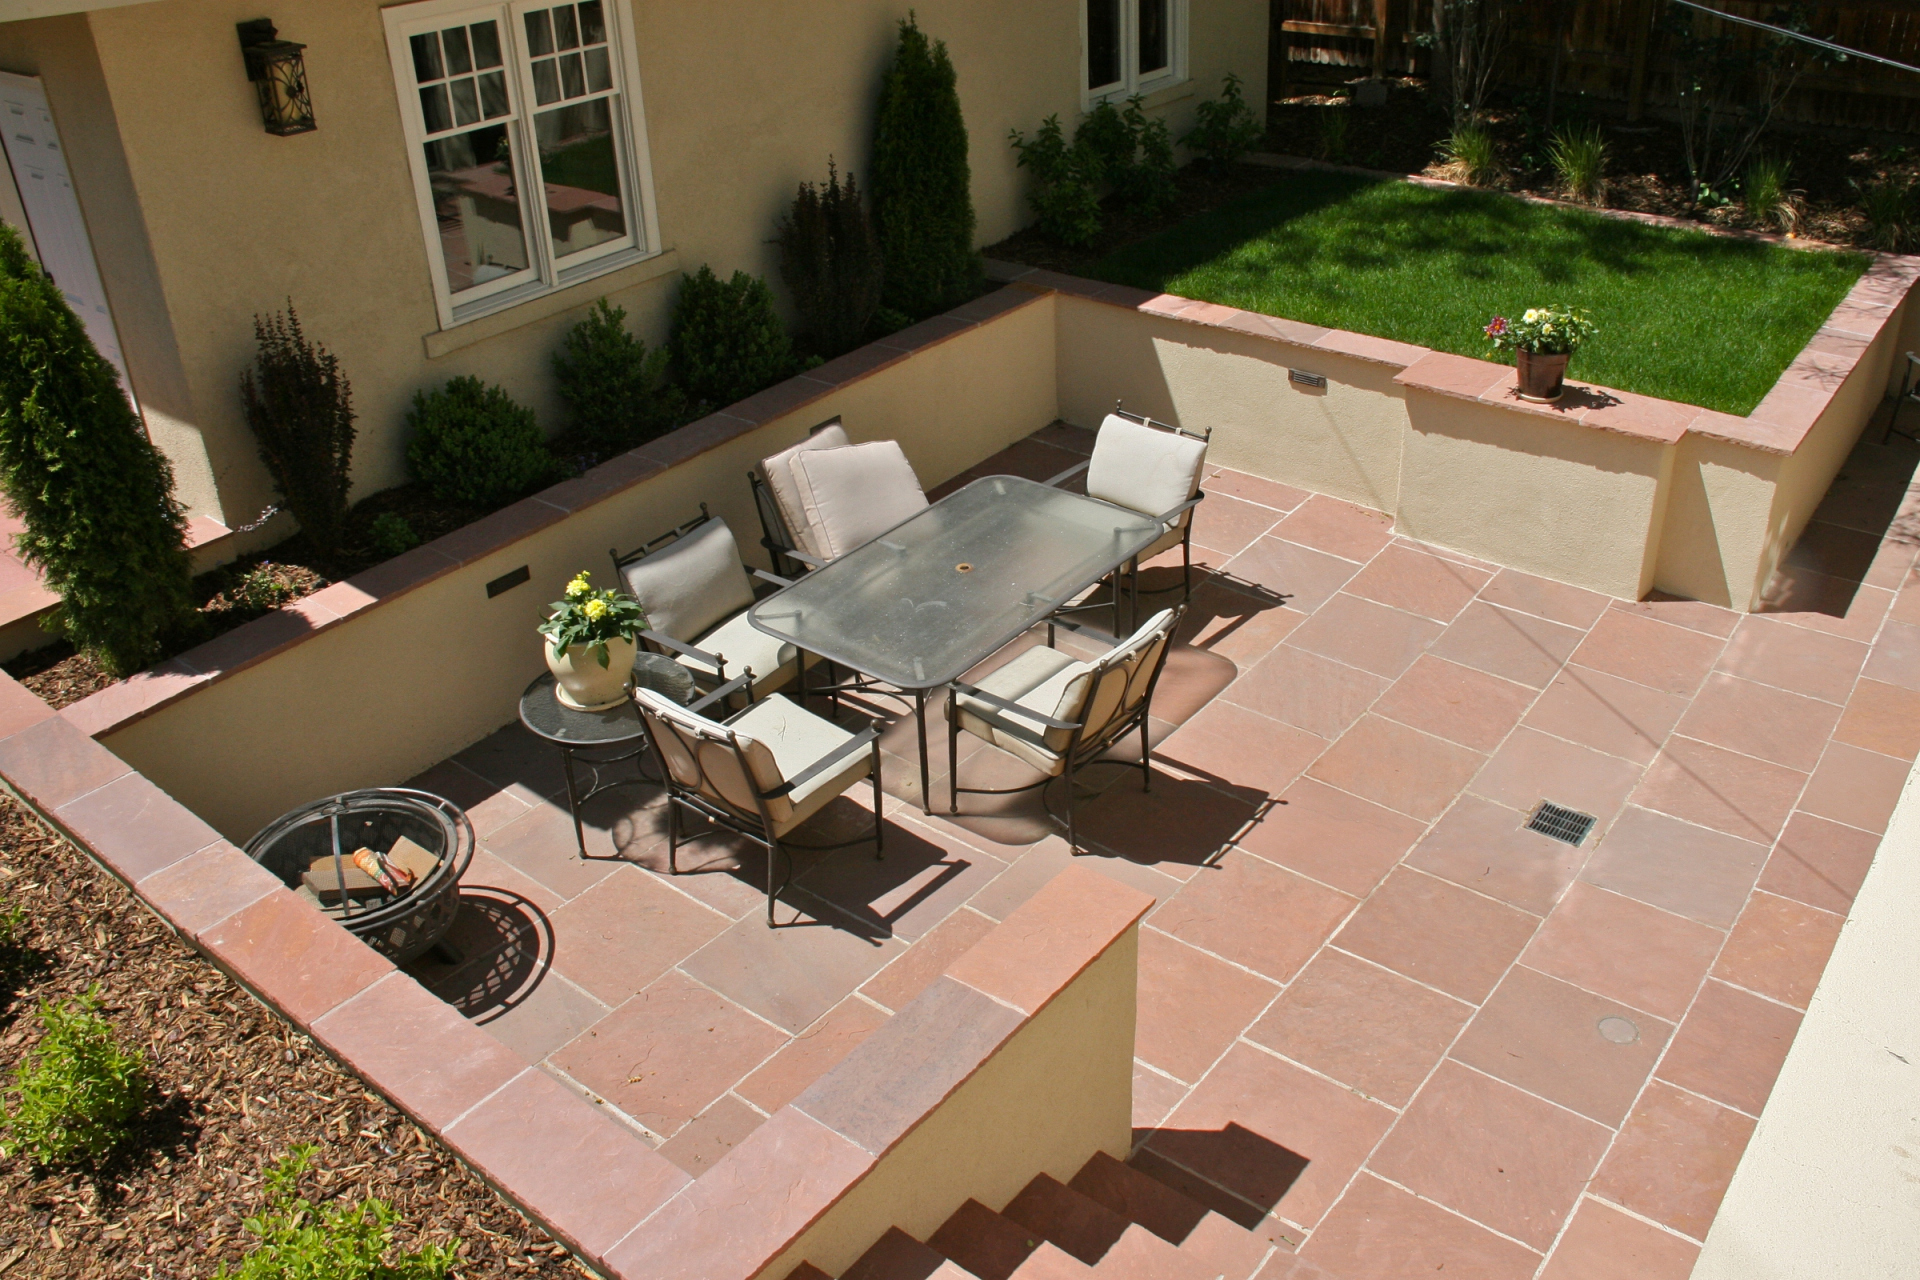 Patio at a Residence